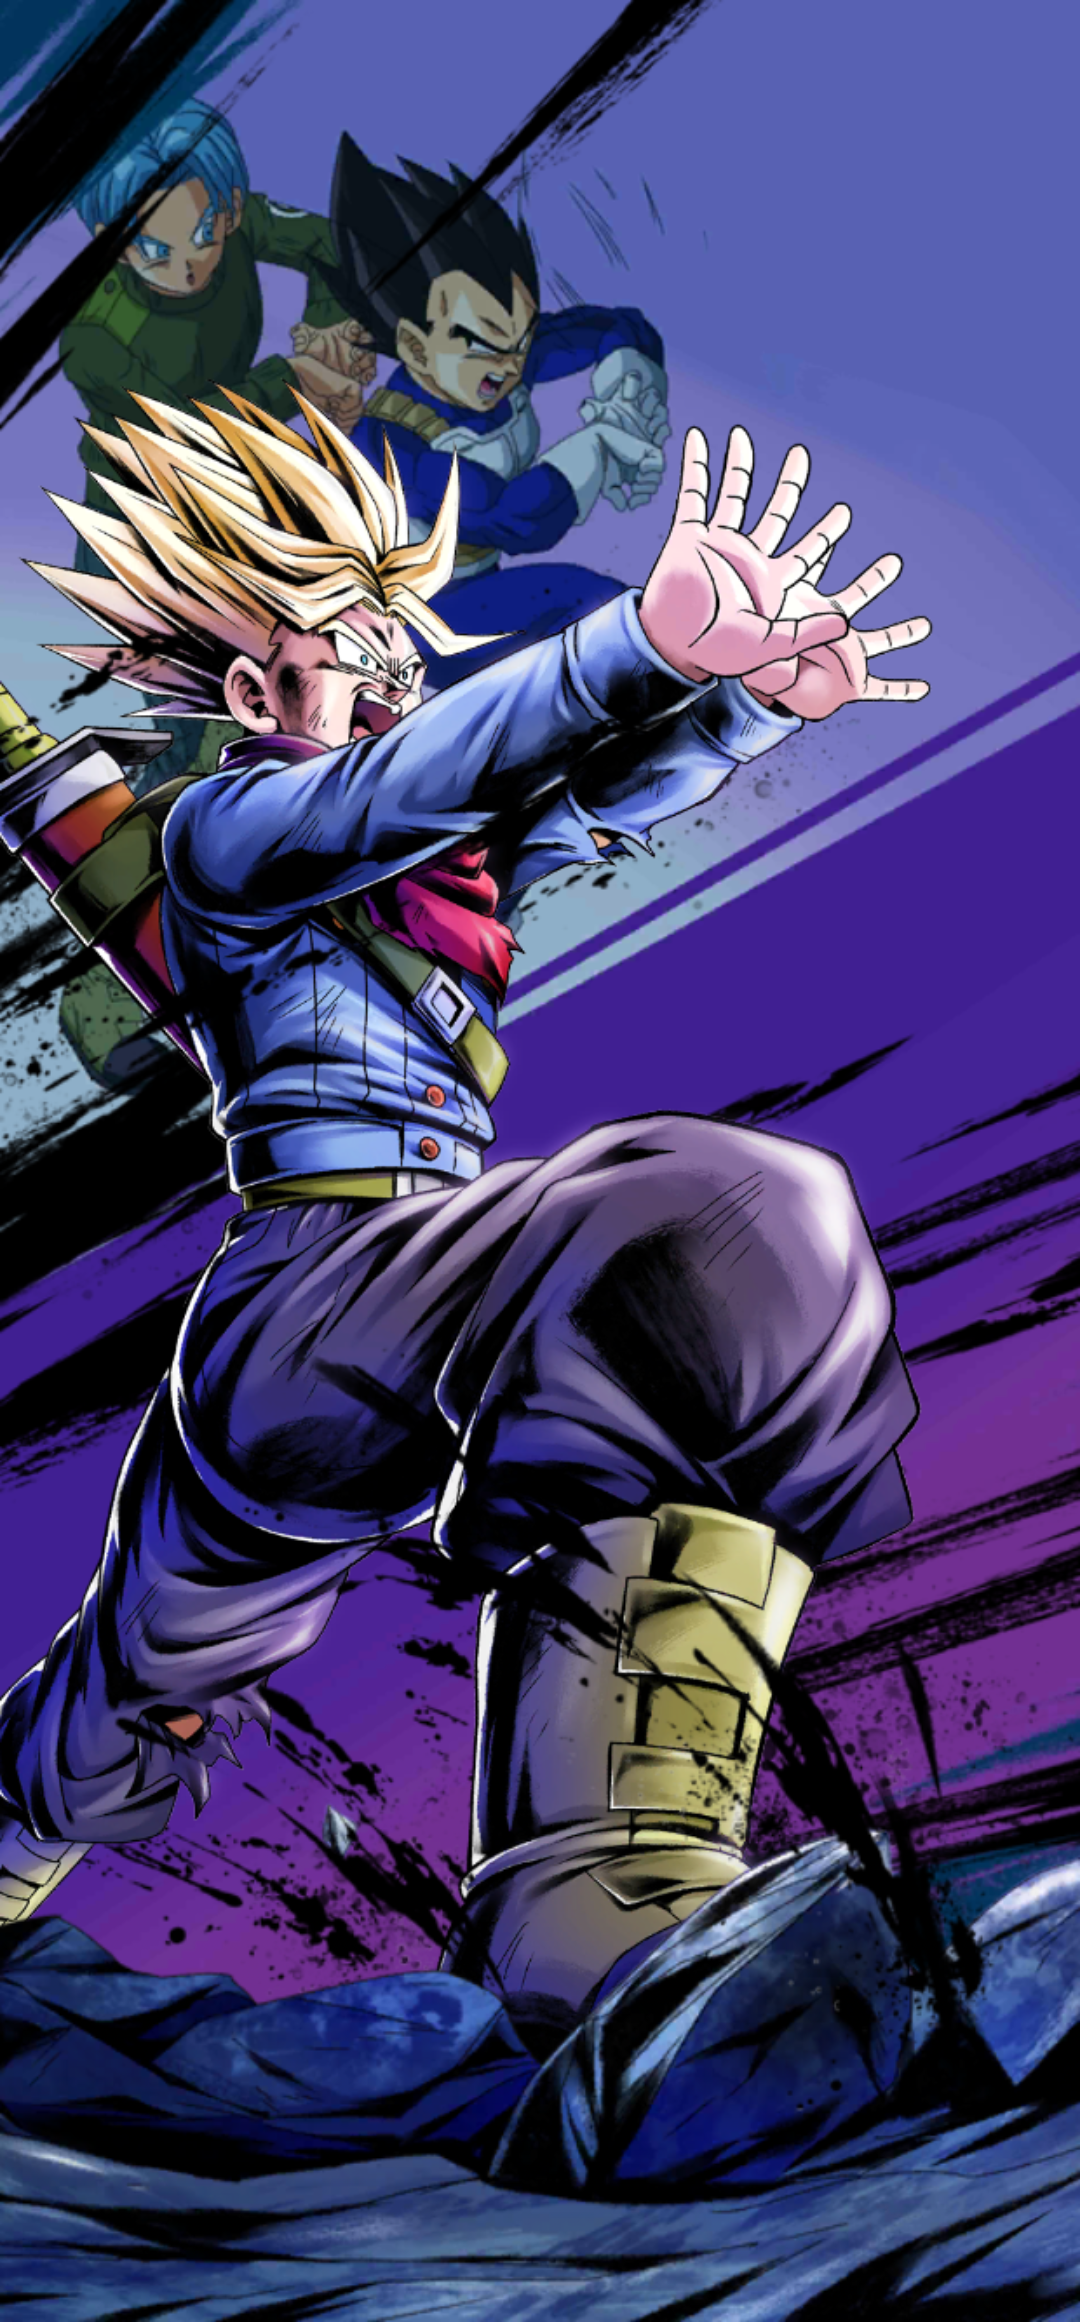 Event-Exclusive Super Saiyan 2 Trunks (Adult) Is Coming